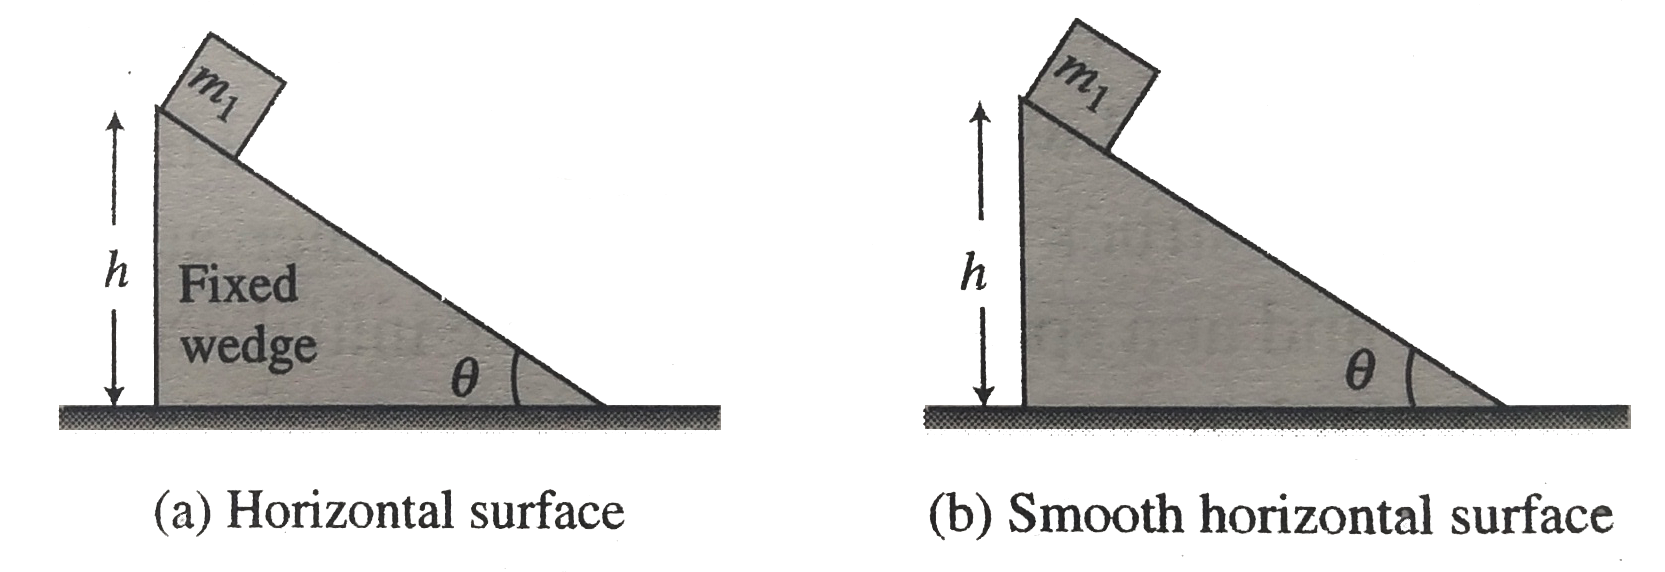 A block of mass m(1) lies on the top of fixed wedge as shown in fig. and another block of mass m(2) lies on top of wedge which is free to move as shown in fig. At time t=0 both the blocks are released from rest from a vertical height h above the respective horizontal surface on which the wedge is placed as shown. There is no friction between block and wedge in both the figures. Let T(1) and T(2) be the time taken by the blocks respectively to just reach the horizontal surface. then